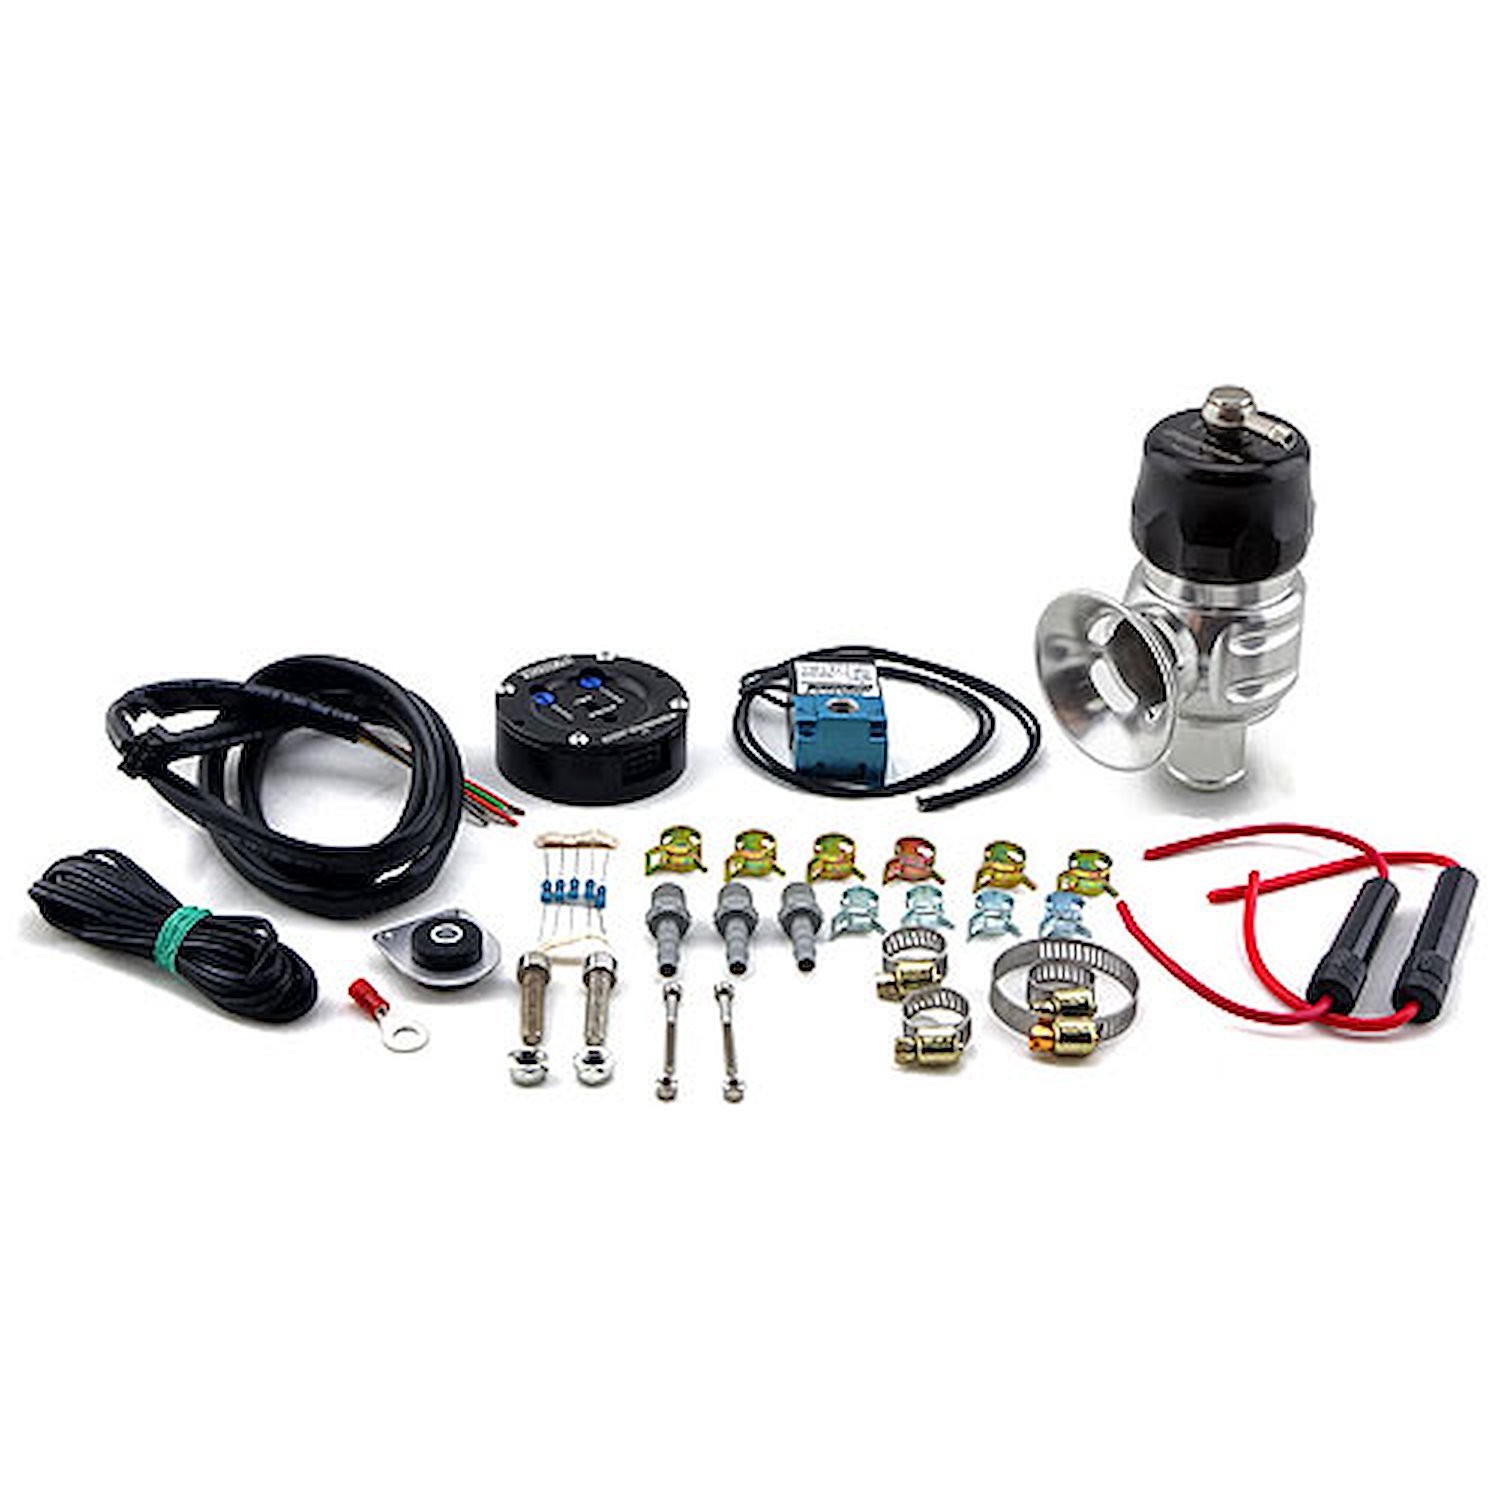 Blow-Off Valve Controller Kit Supersonic Type 5 Series Blow-Off Valve